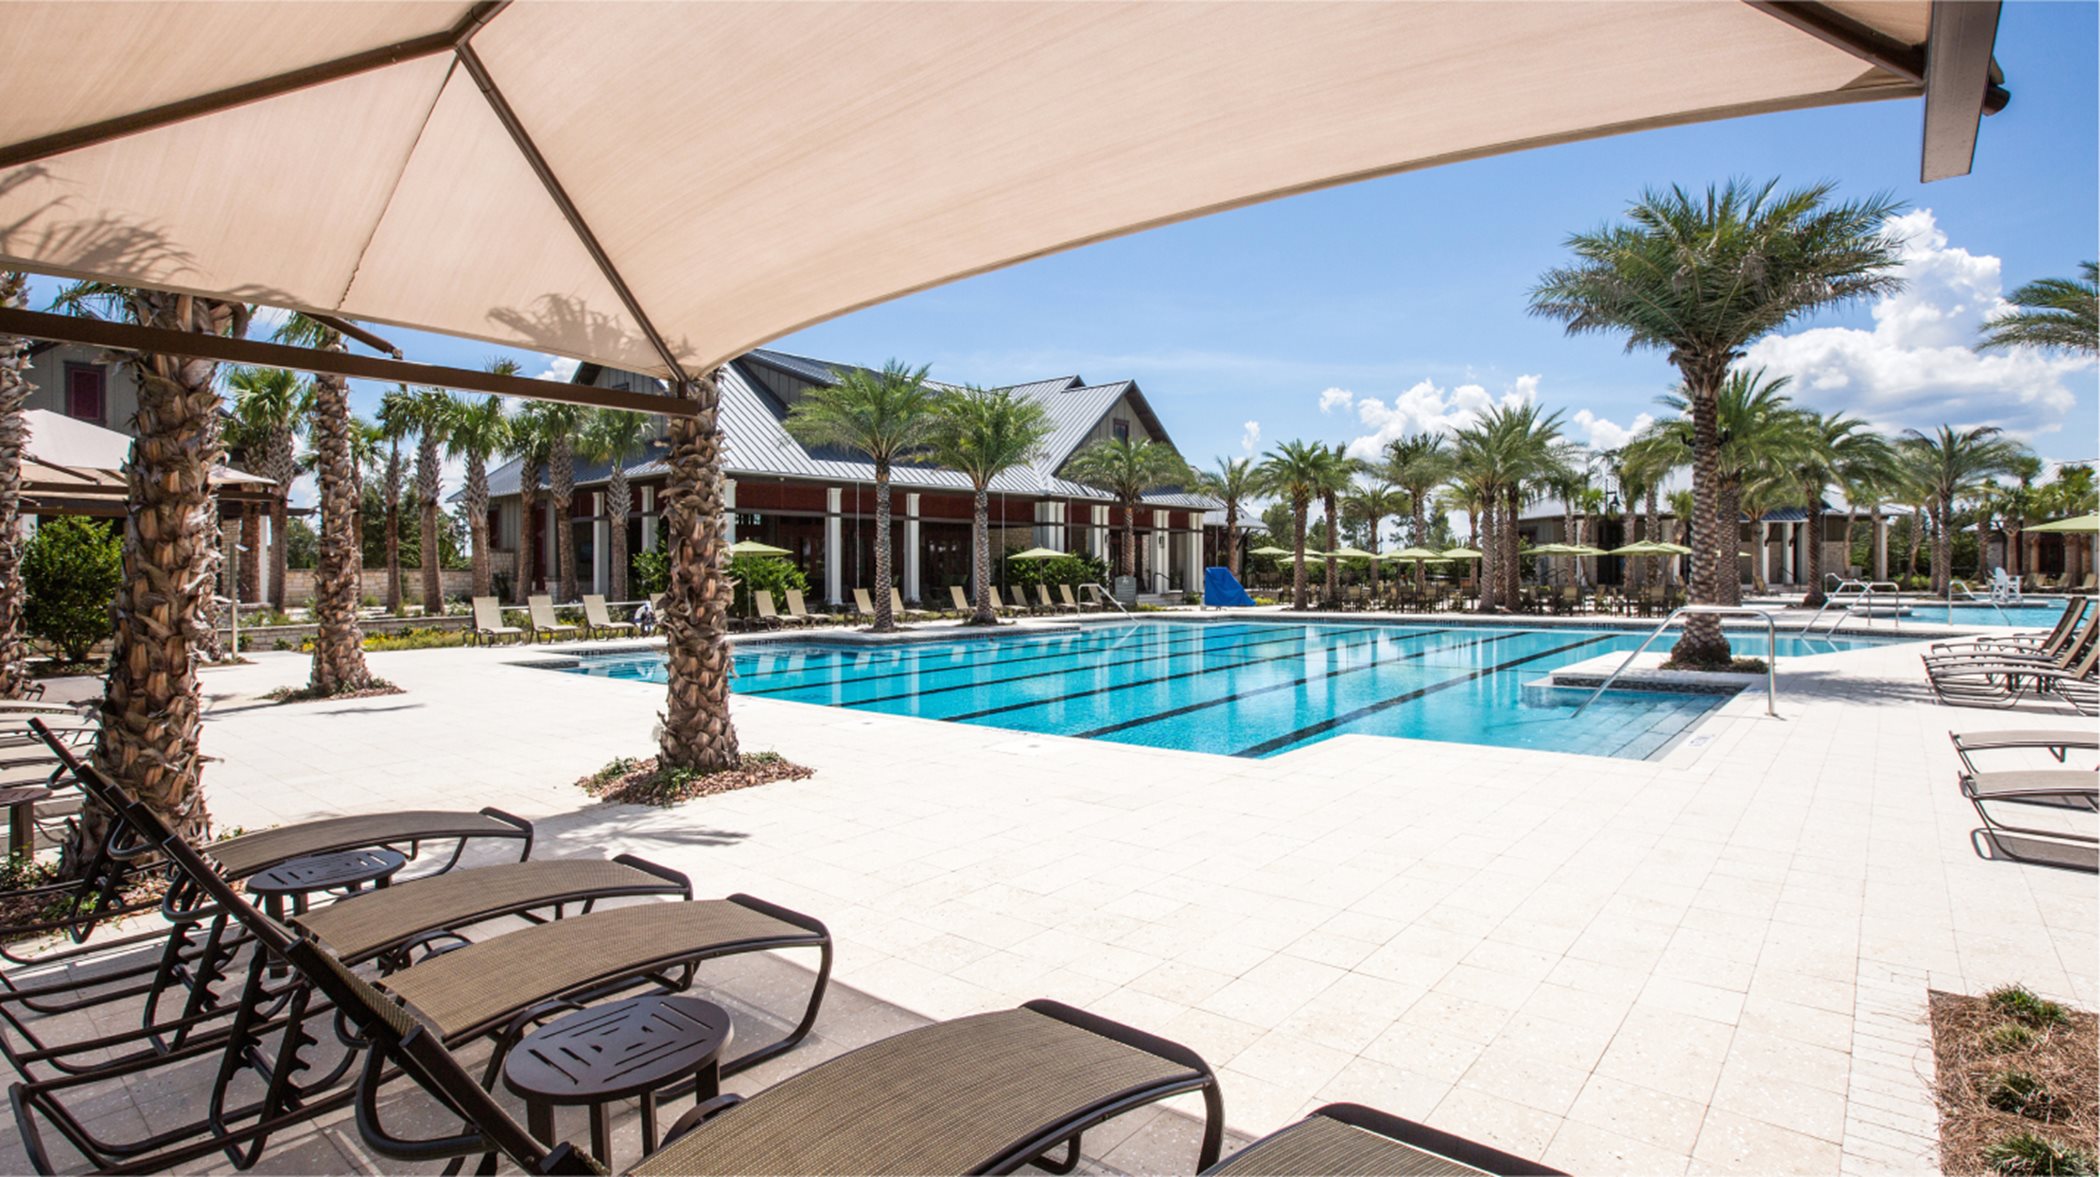 Swimming pool and lounge area located outside clubhouse